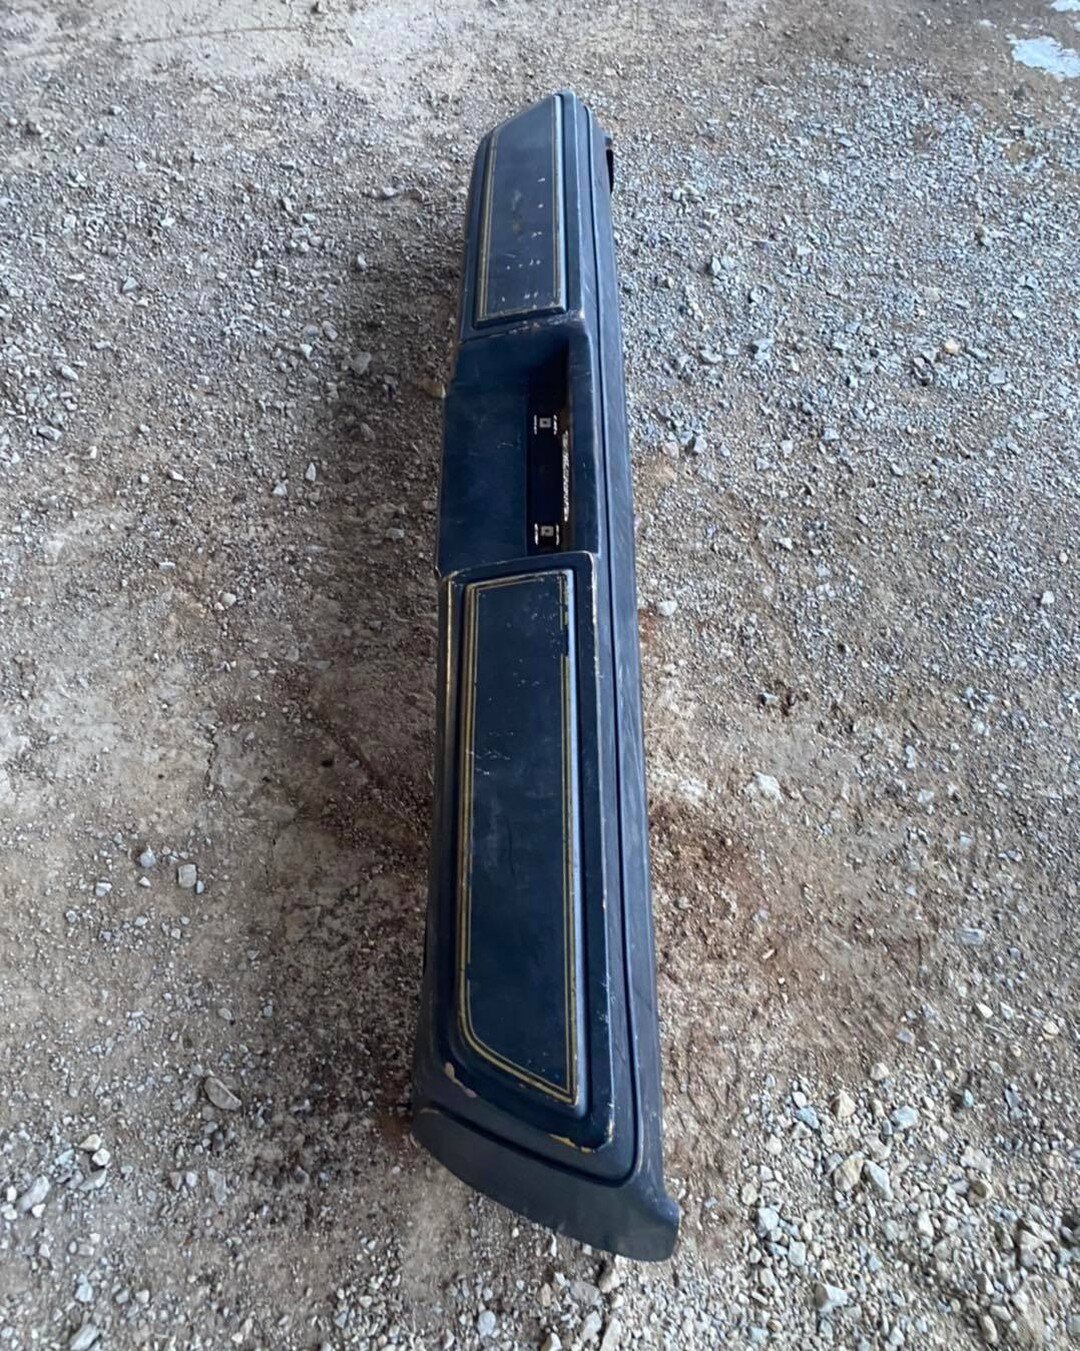 79-81 Rear bumper in great shape. $200 local pickup

$265 shipped to your door in the lower 48.